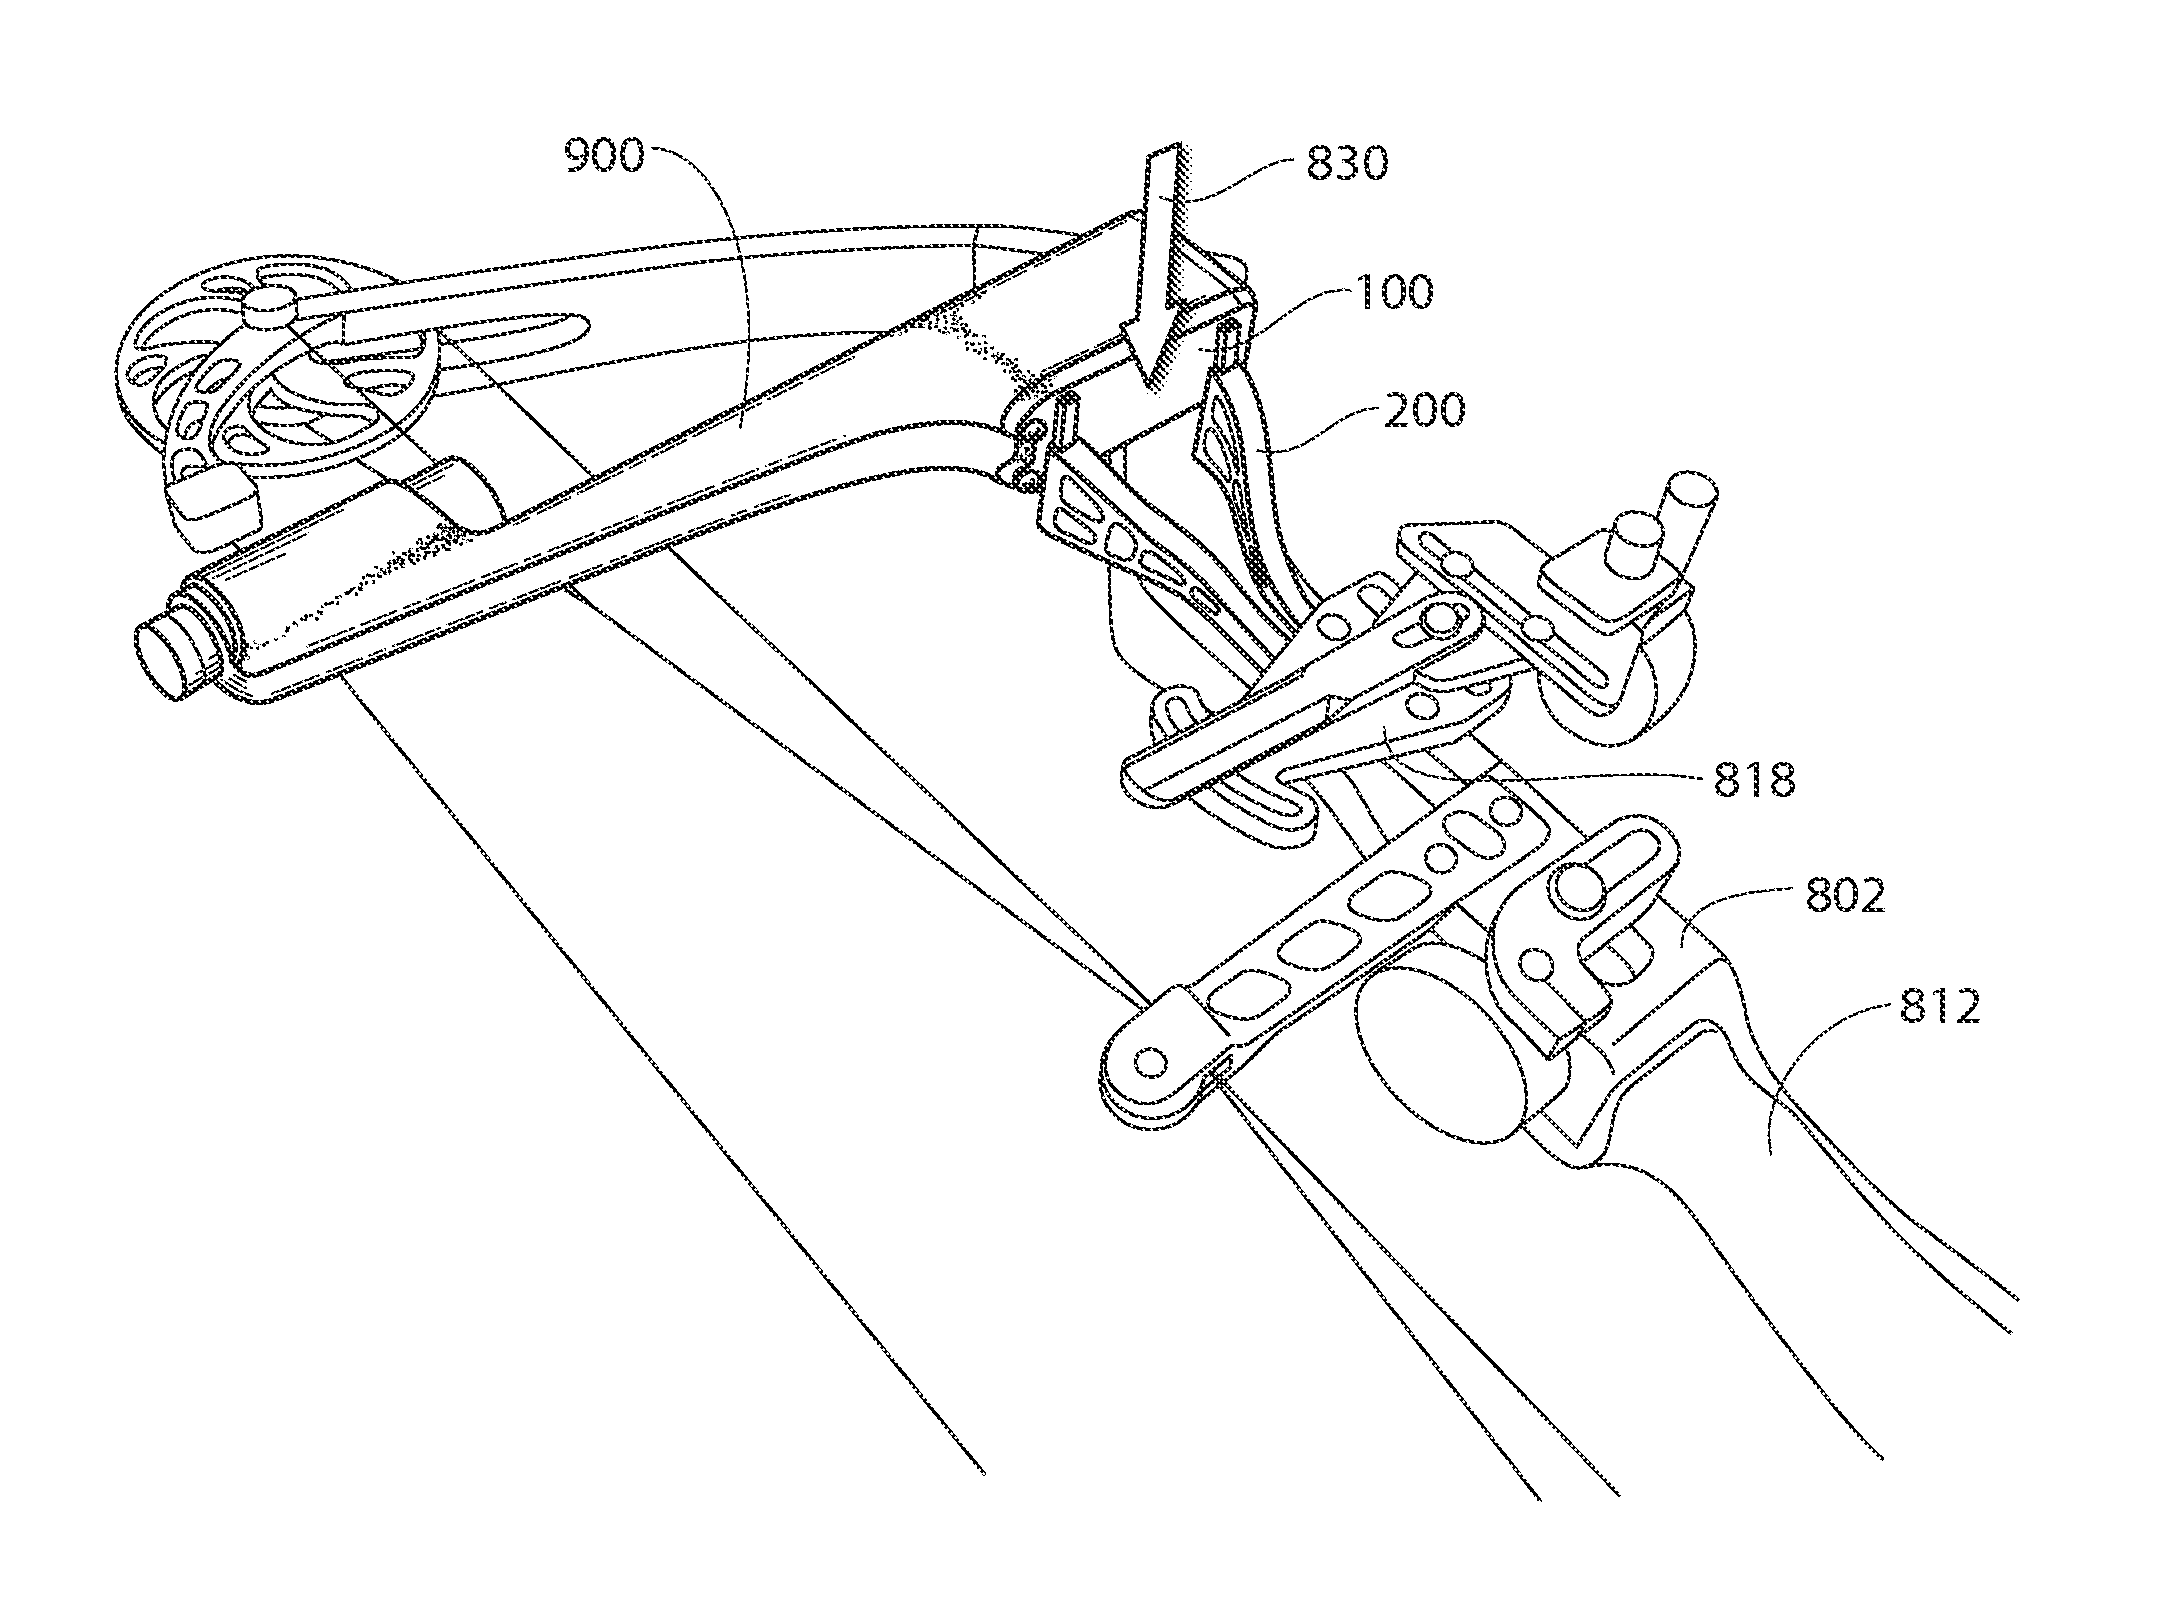 Systems and methods of accessory mounting